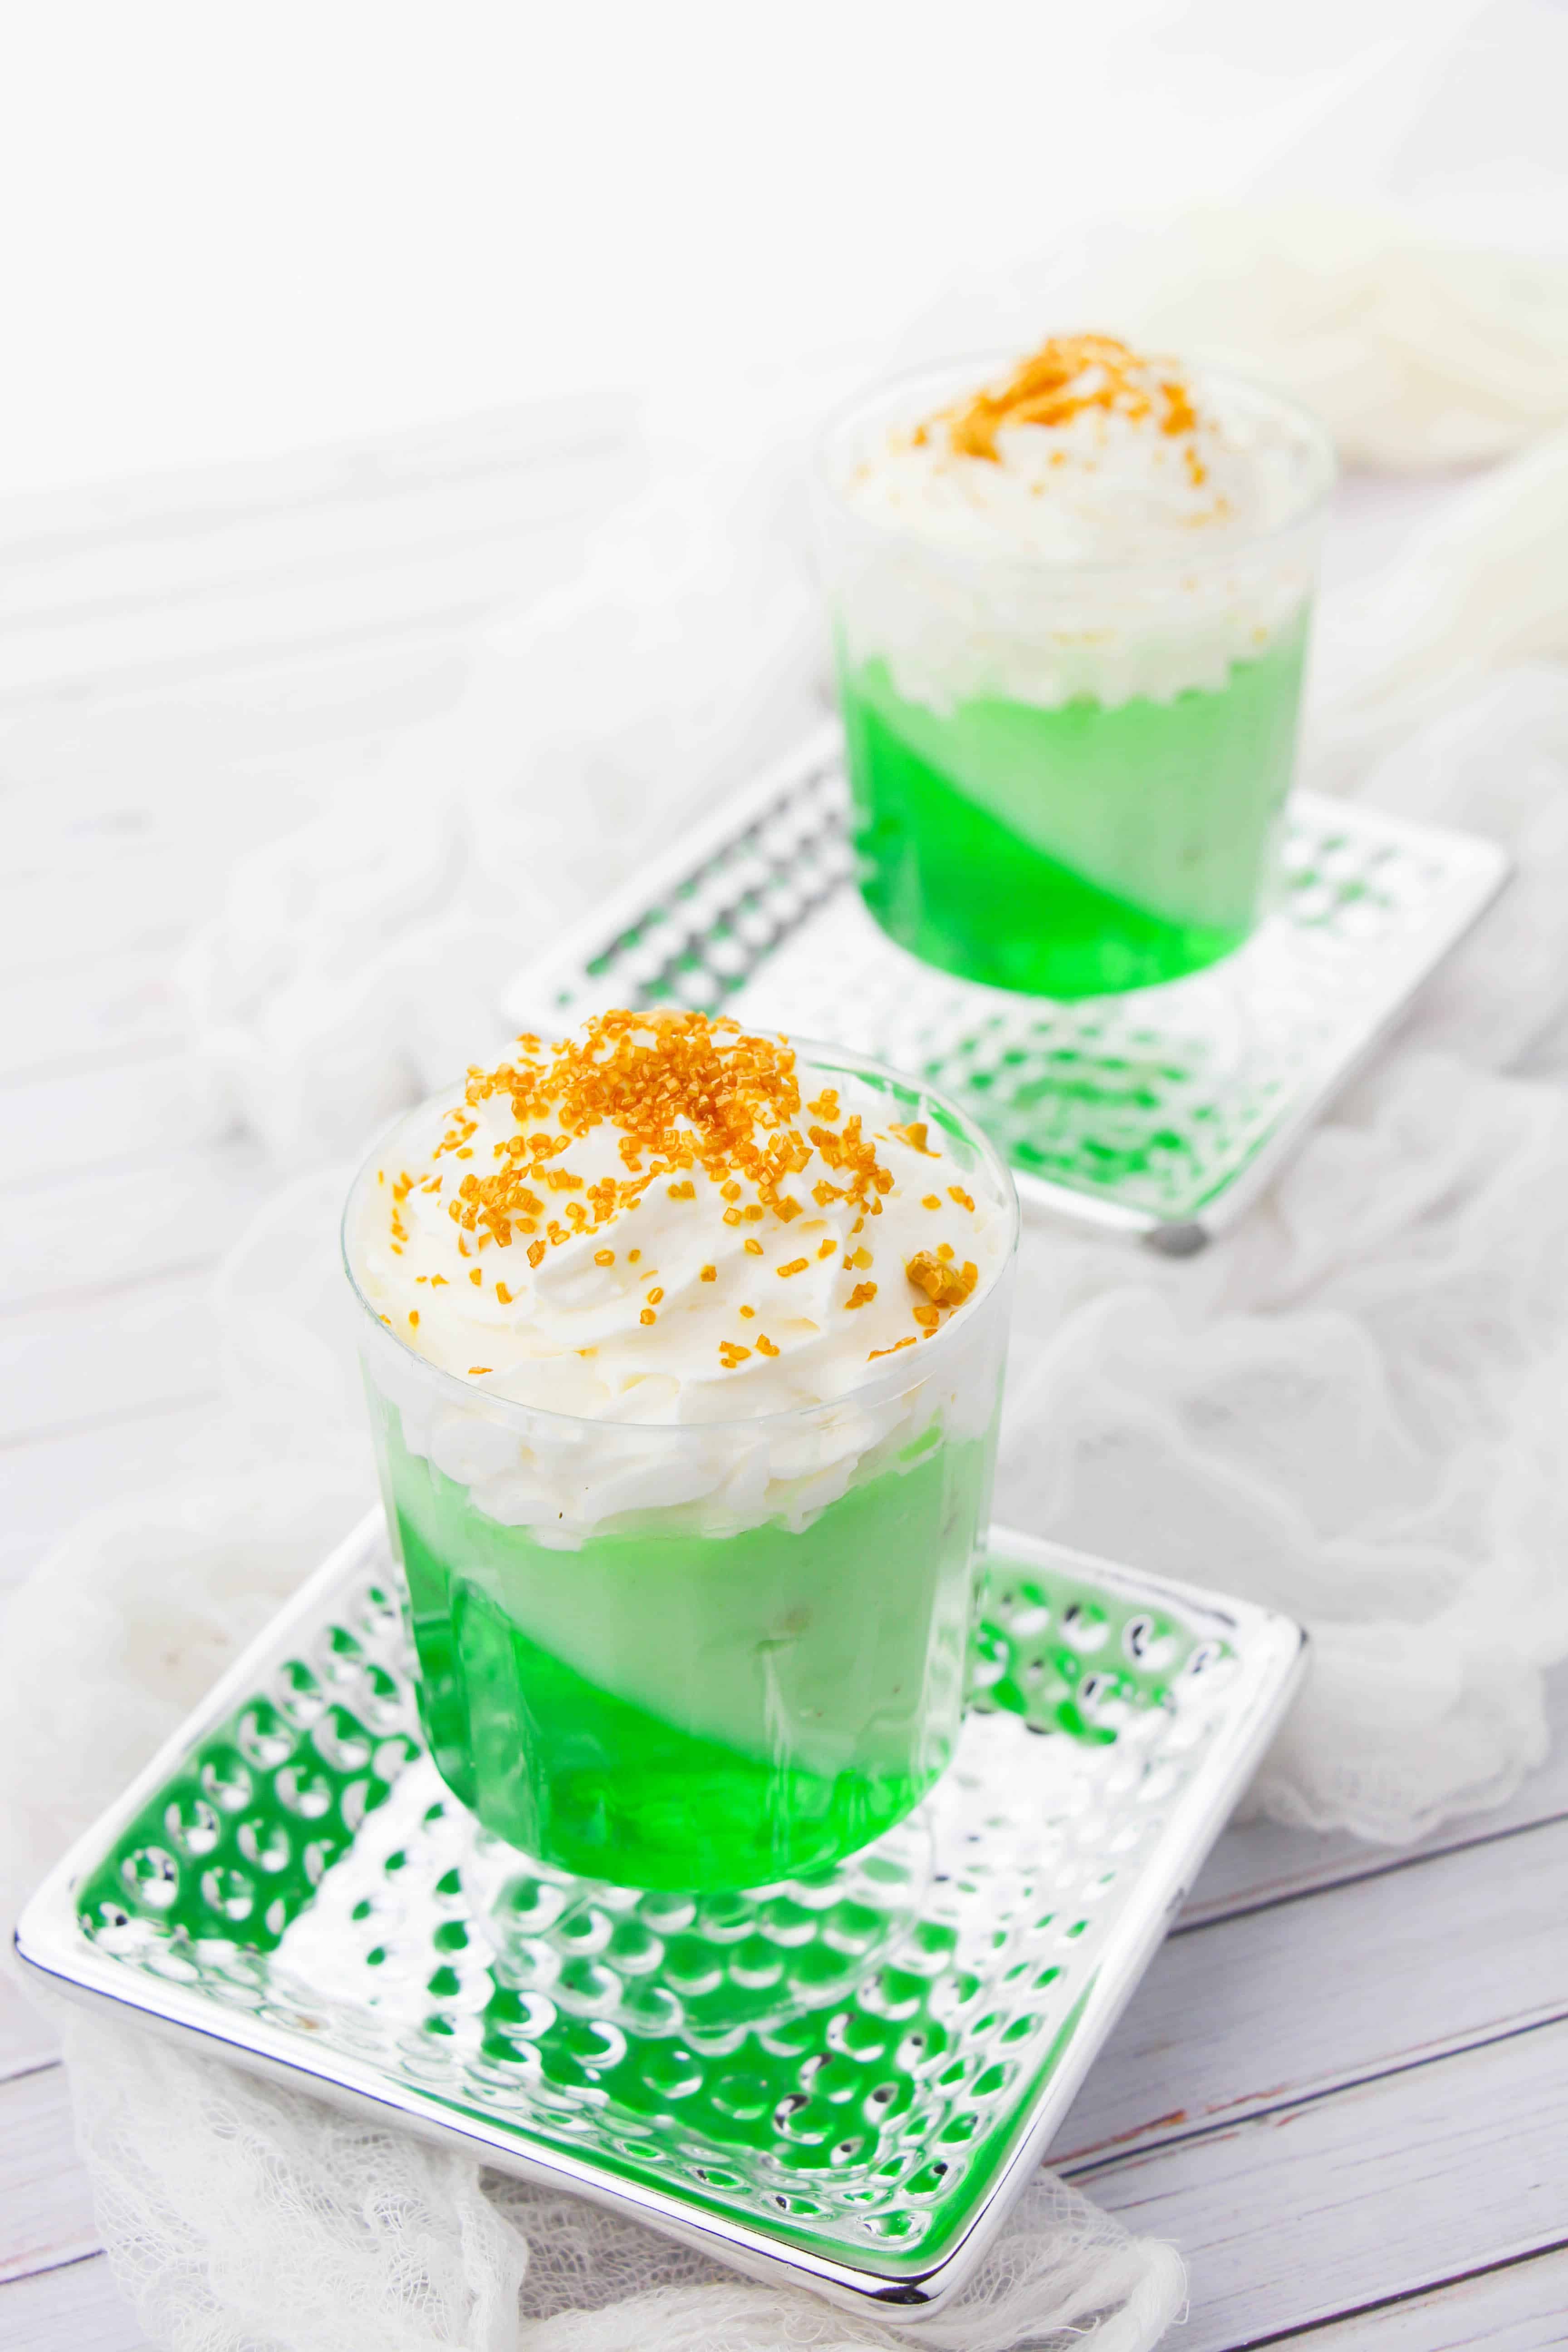 Two green jello parfaits each sitting on a silver reflective plate